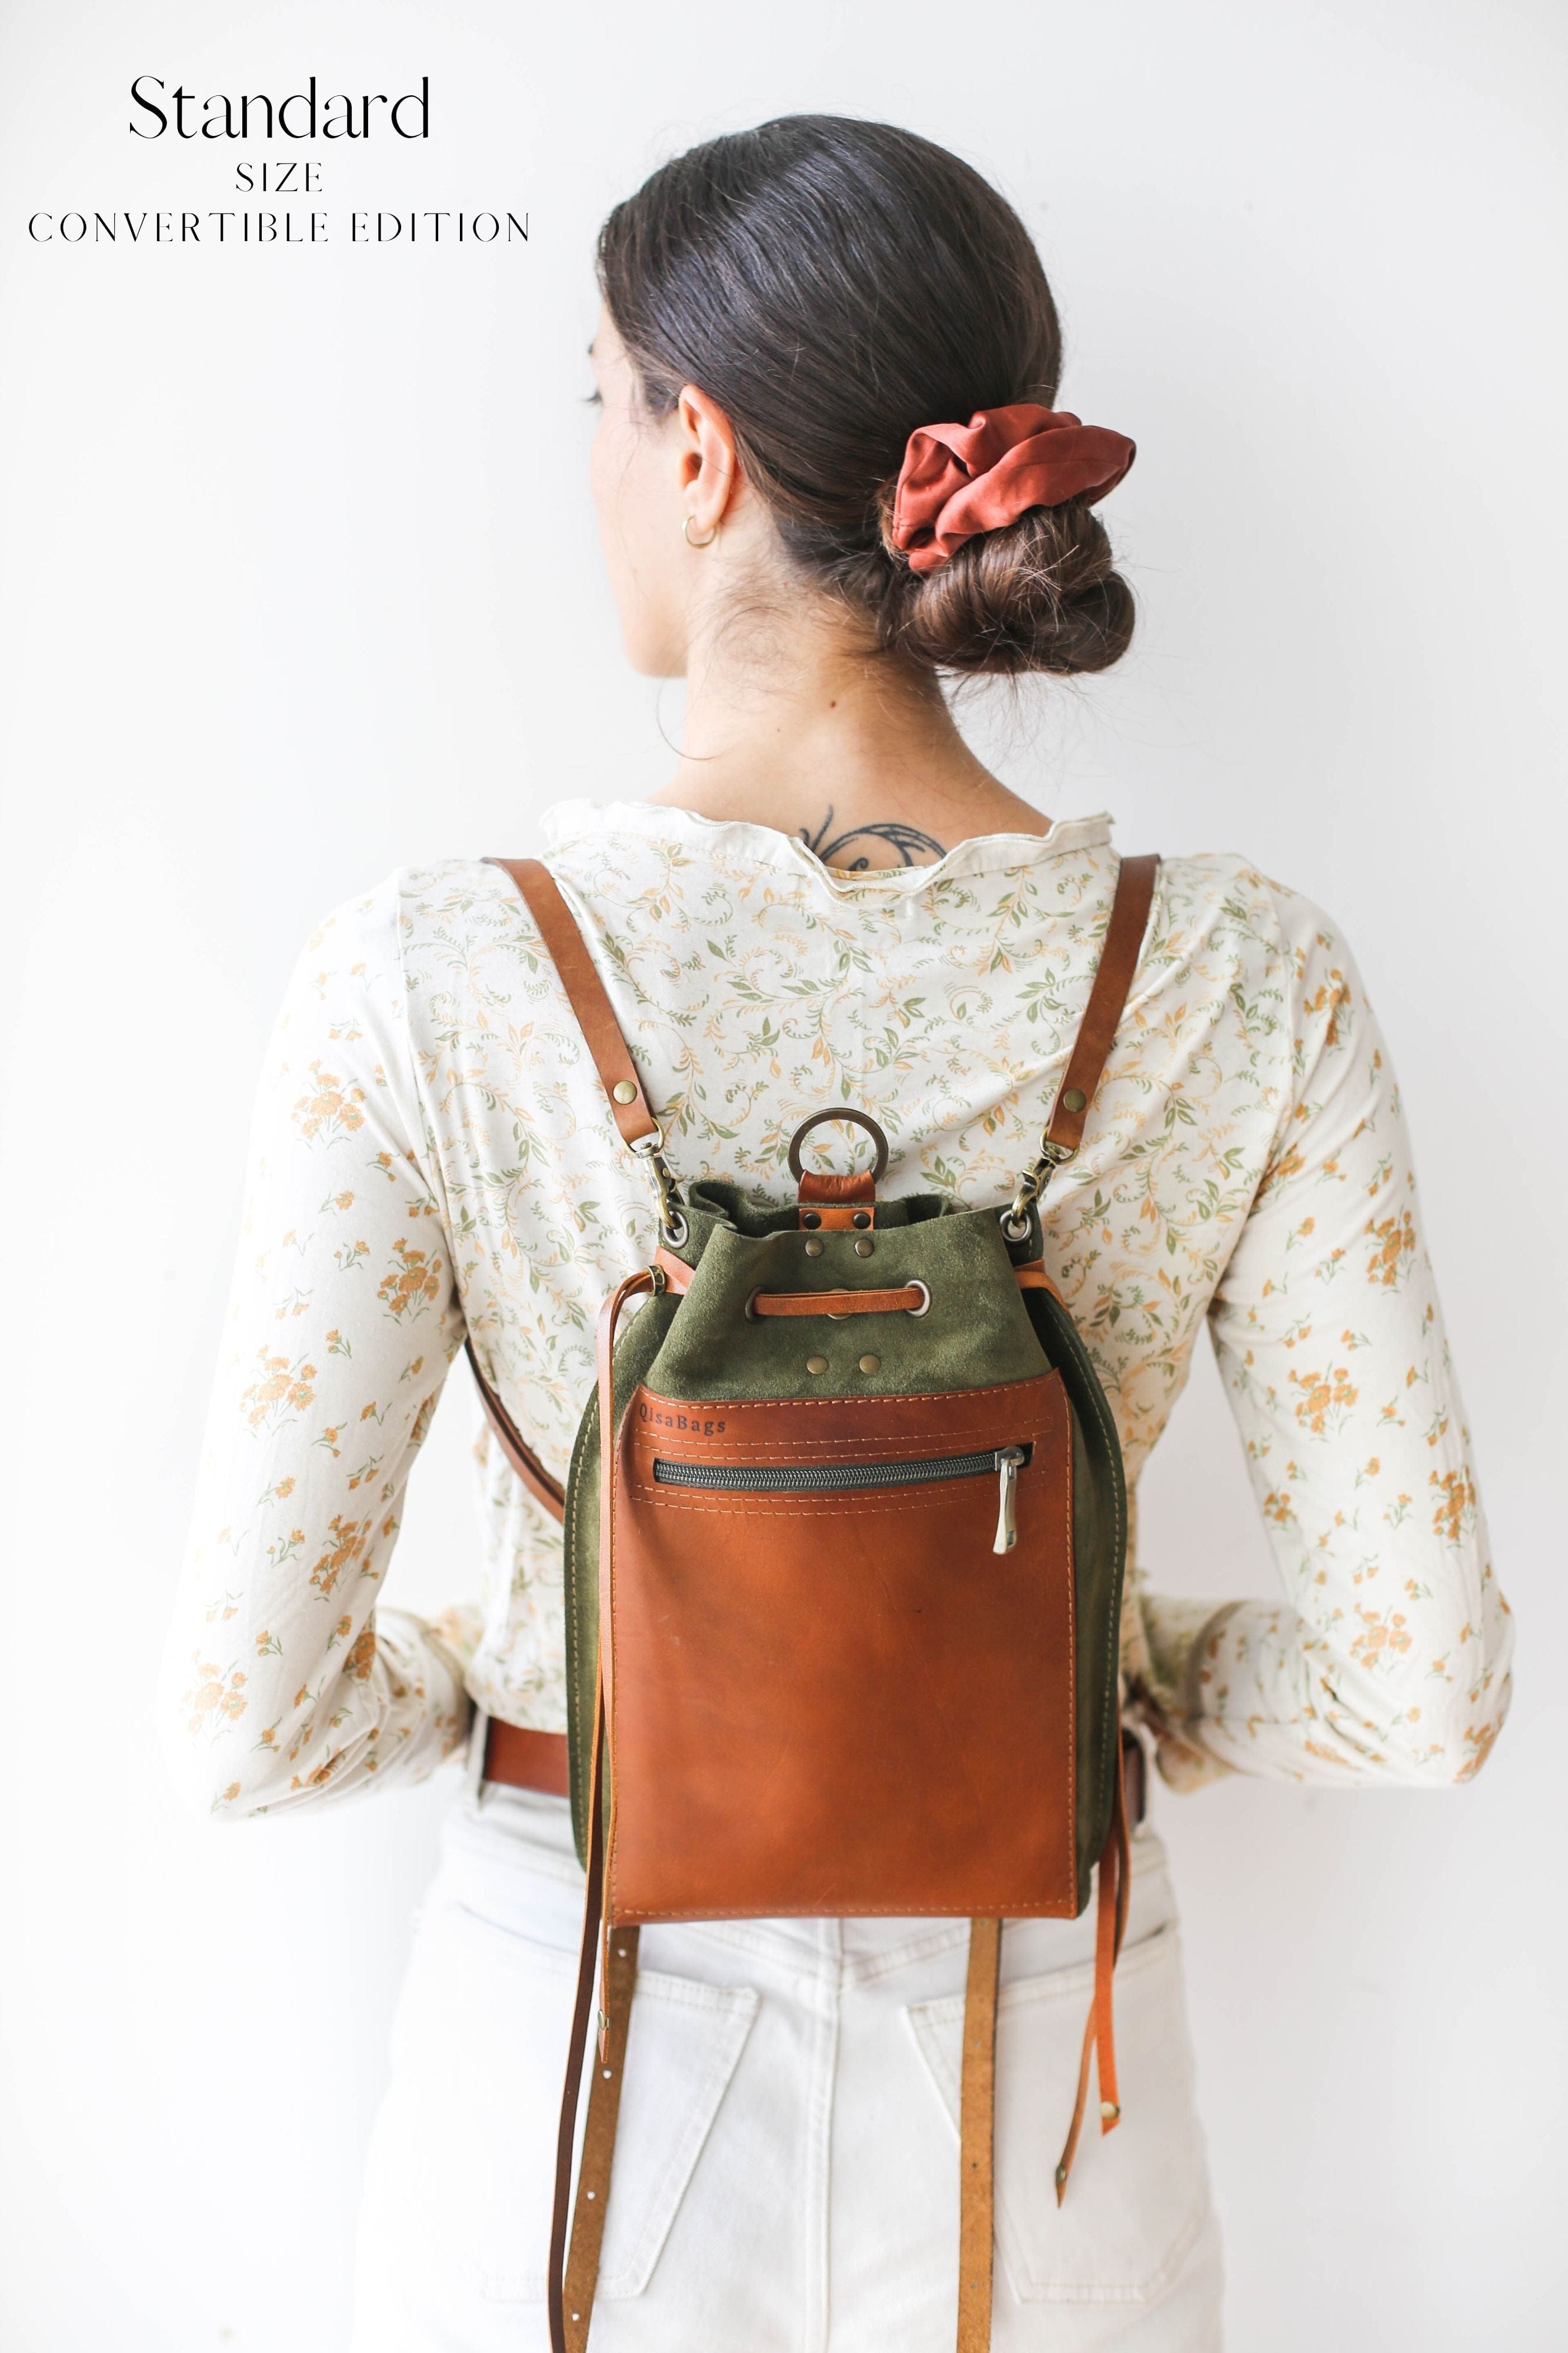 Leather Backpack Purses | Convertible Leather Backpacks